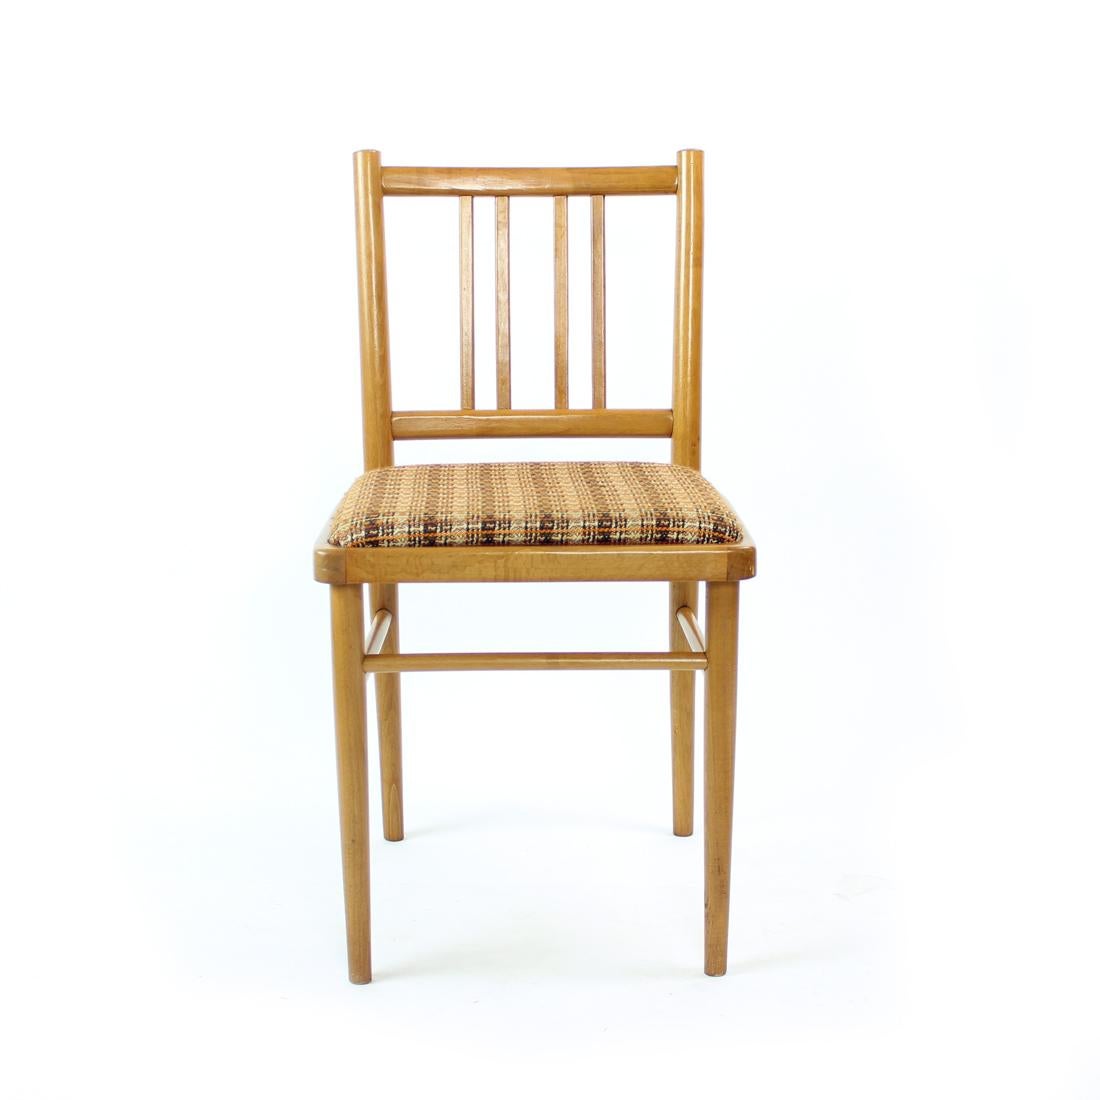 Beautiful set of 4 dining chairs. Produced in 1960s by TON in Czechoslovakia. The chairs are made of strong oak wood in blond shade of wood. The seat is upholstered in an original fabric. The design of the chairs shows typical features of the